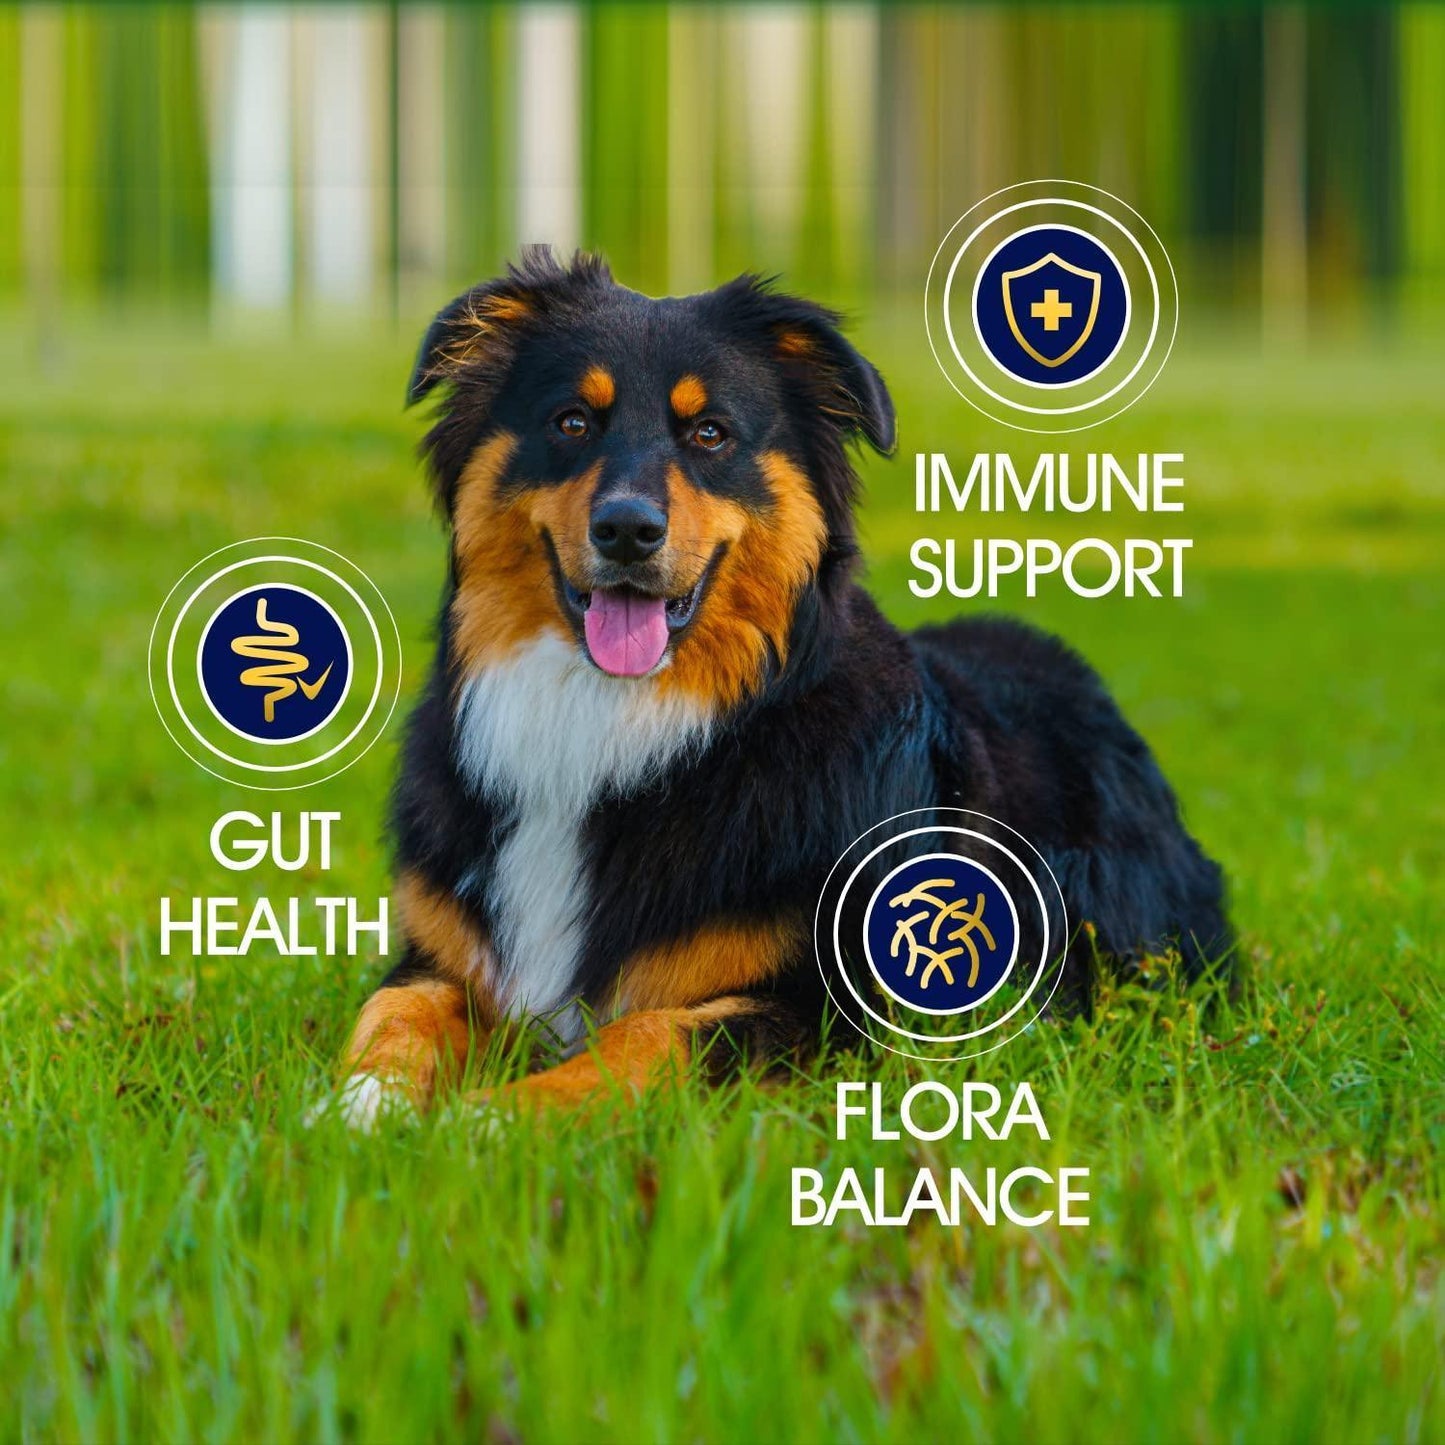 Probiotics for Dogs Support Good Health Itchy Skin Allergies Immunity Yeast Balance Reduce Diarrhea Gas 6 oz